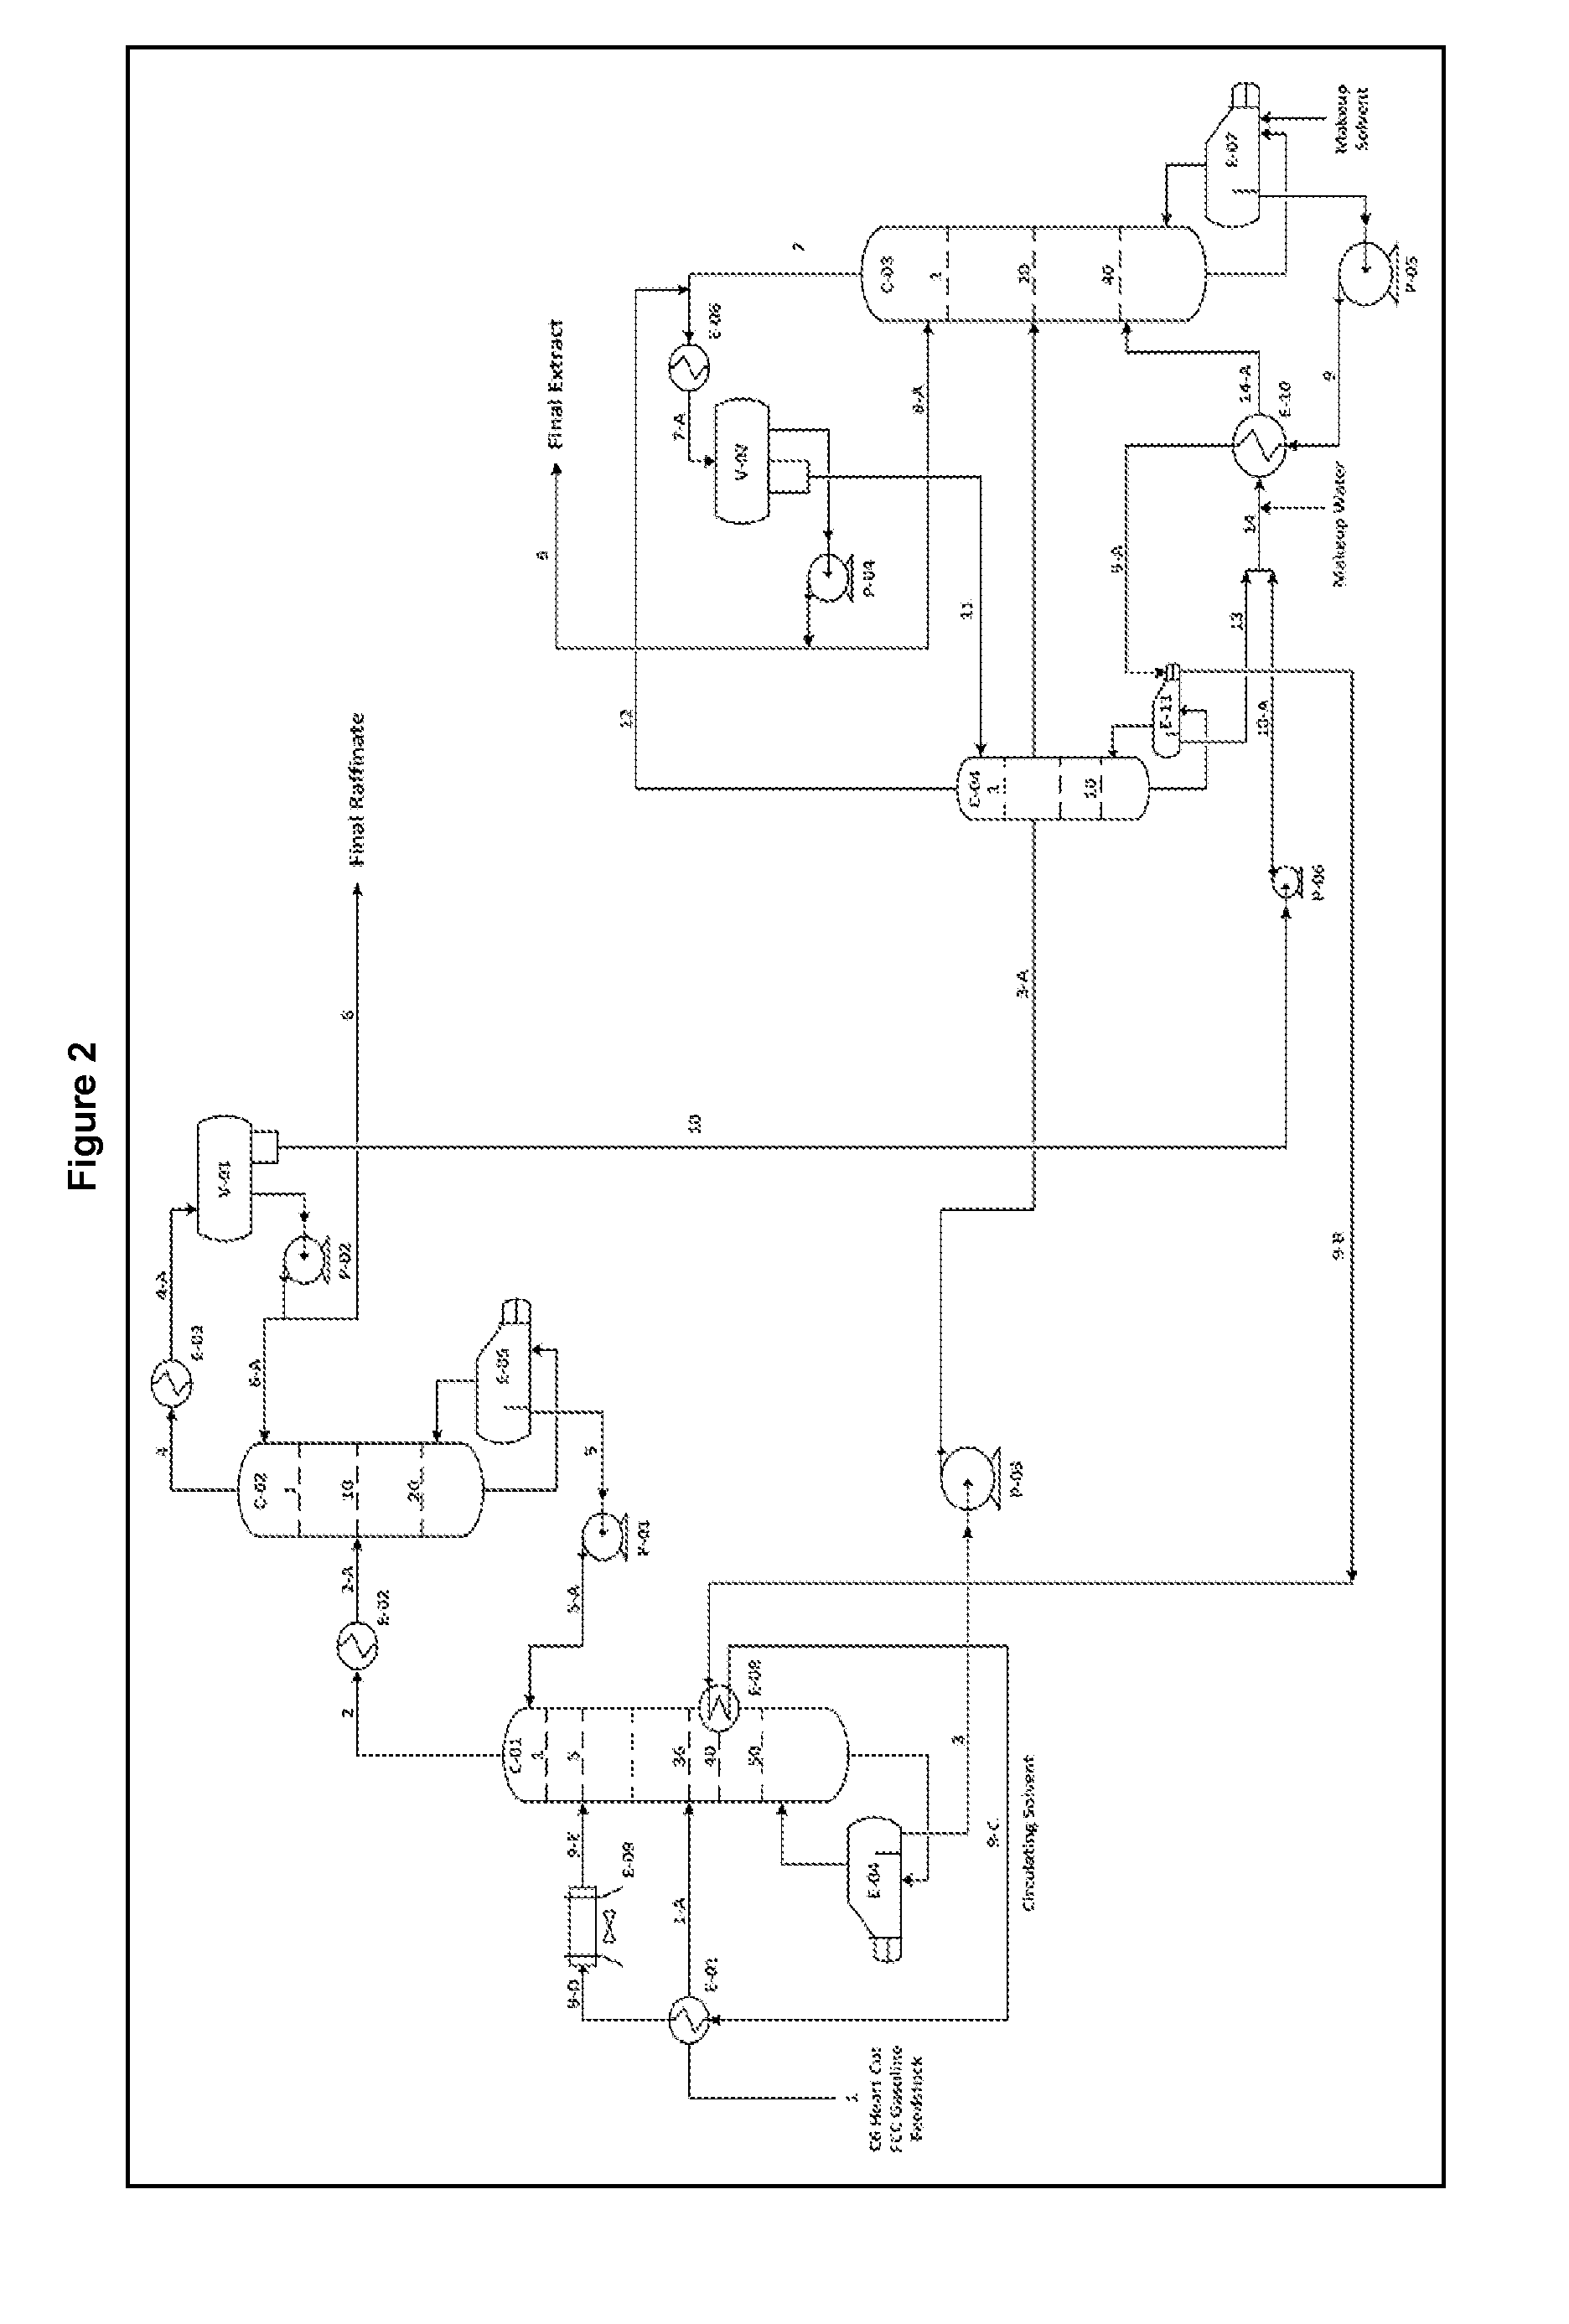 Process for simultaneous production of benzene lean gasoline and high purity benzene from cracked gasoline fraction